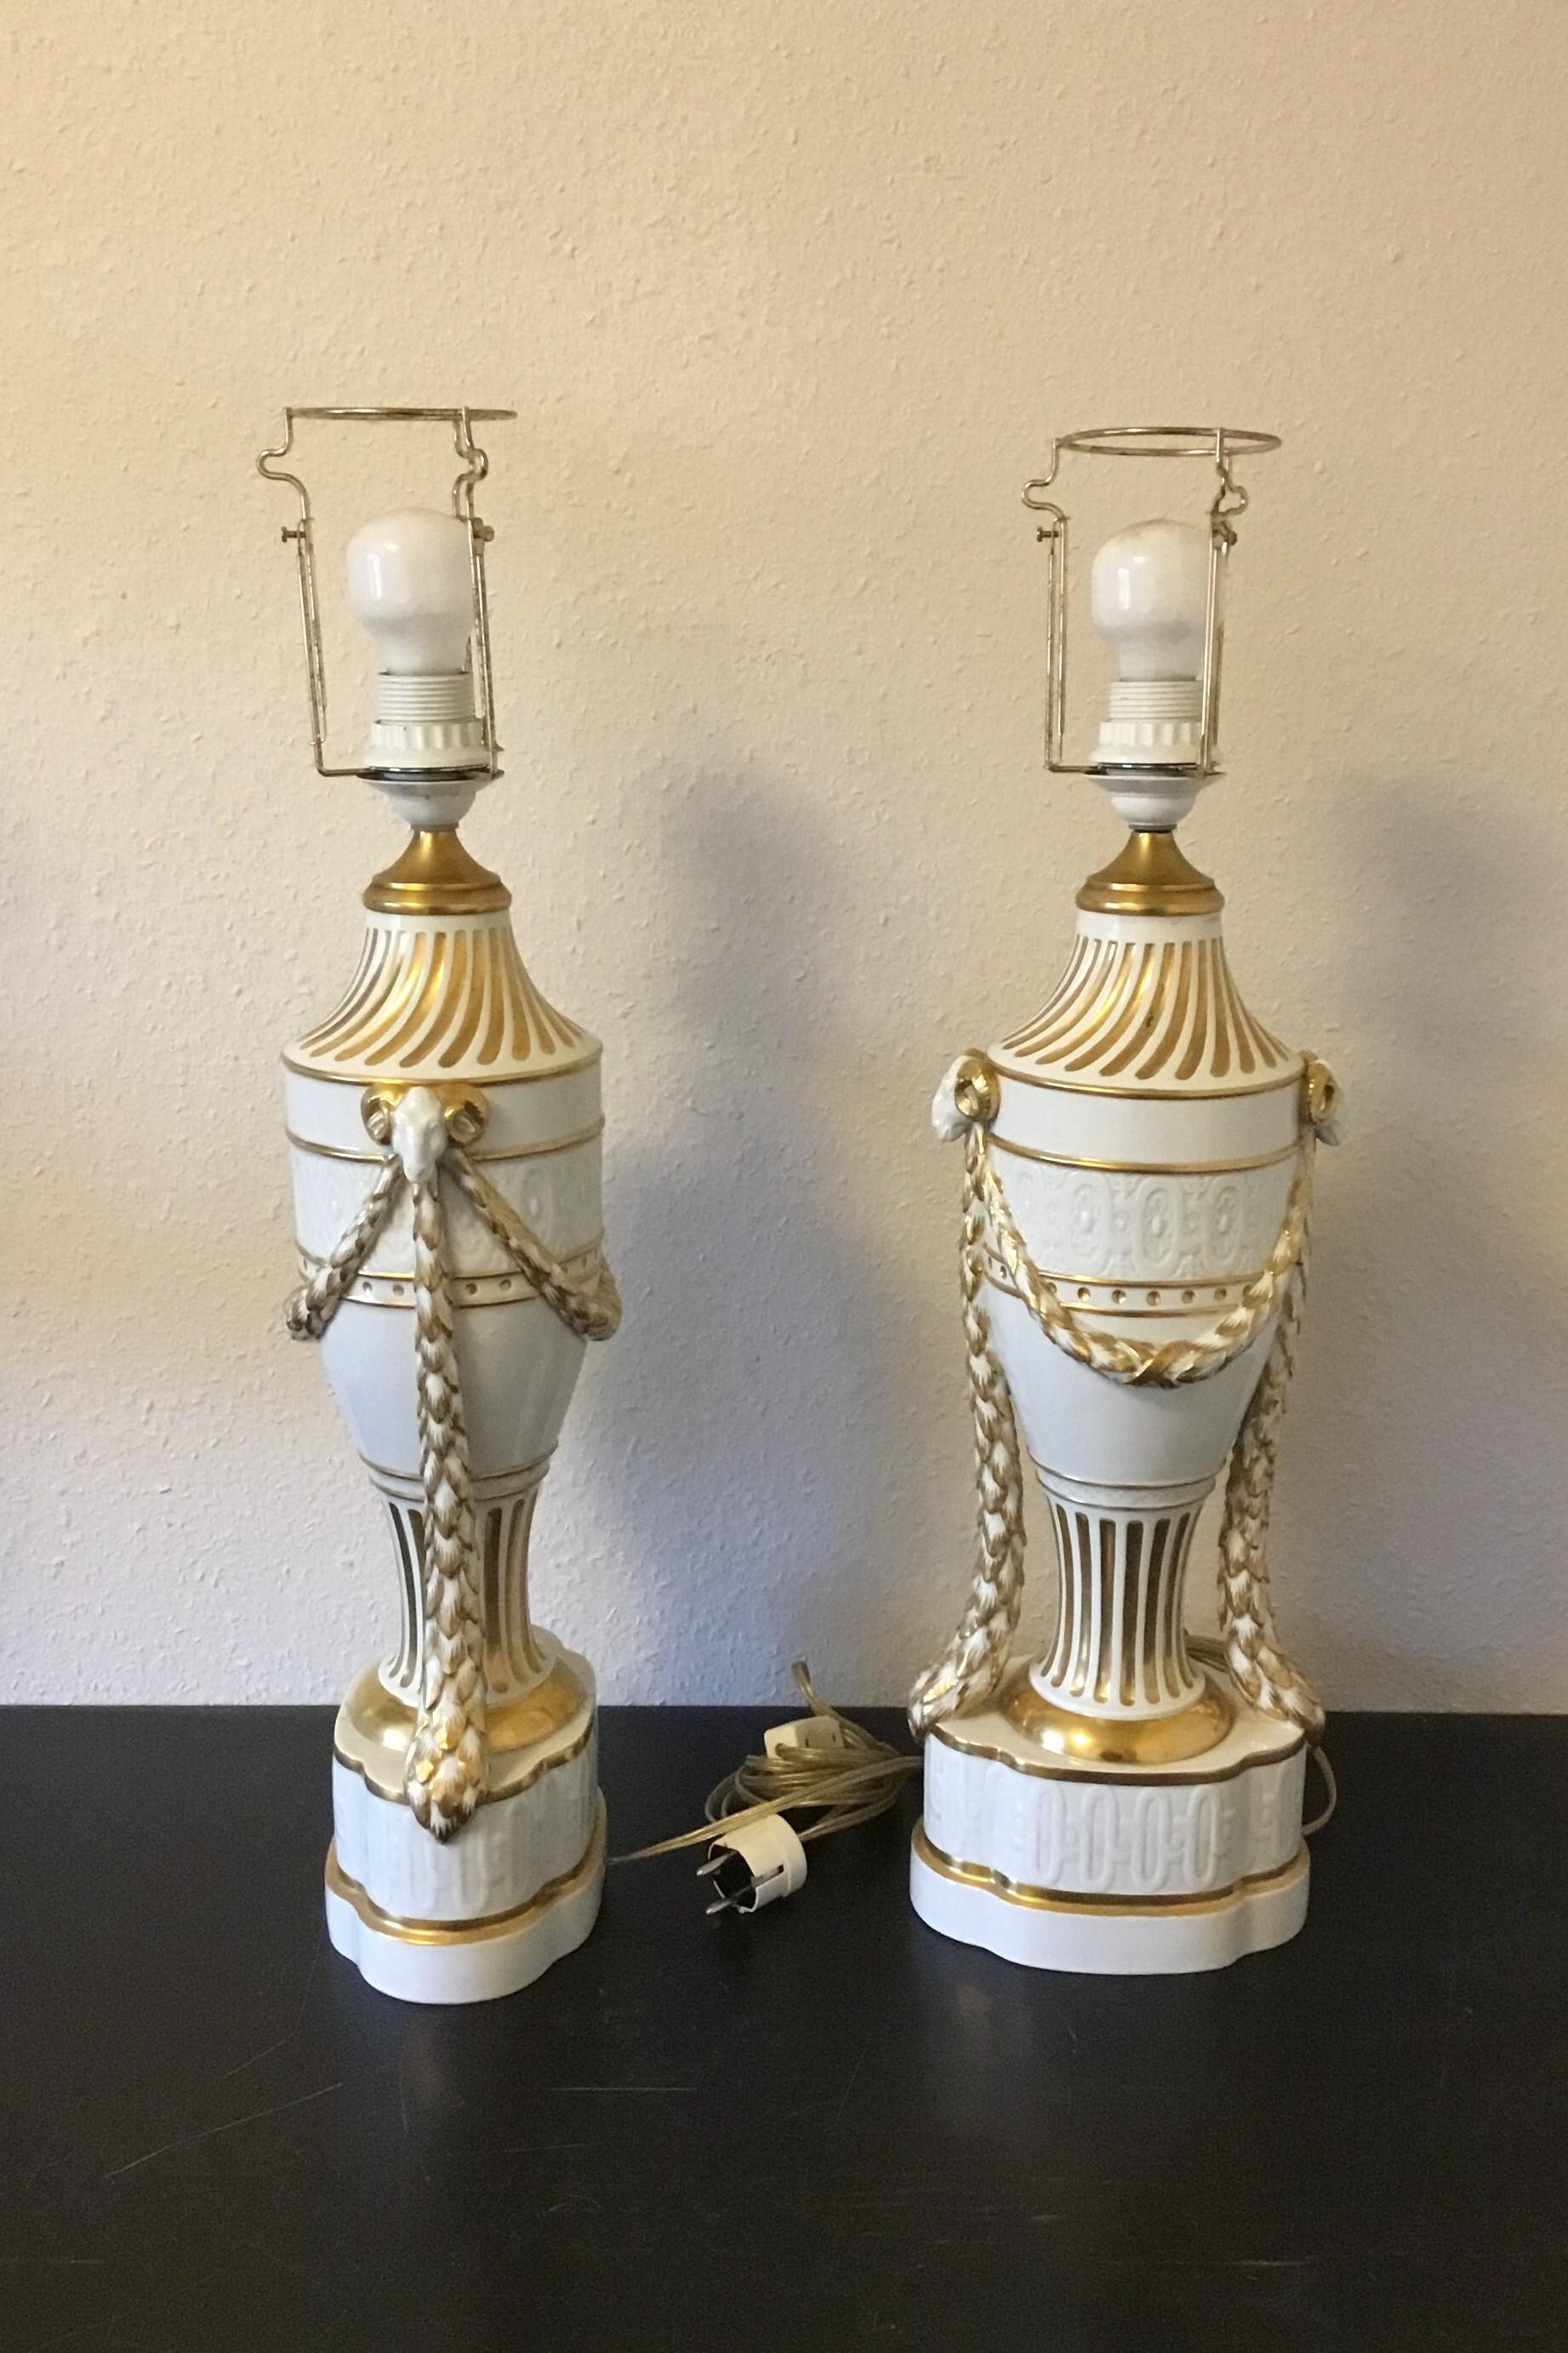 Royal Copenhagen, a pair of baluster-shaped lamps on base decorated with garlands, Ram heads and gold. With Juliane Marie Stamp from 1905-1912. Mounted with EL bulbs and wire. One with a crack otherwise in fine condition. Measures 65 cm / 25 19/32